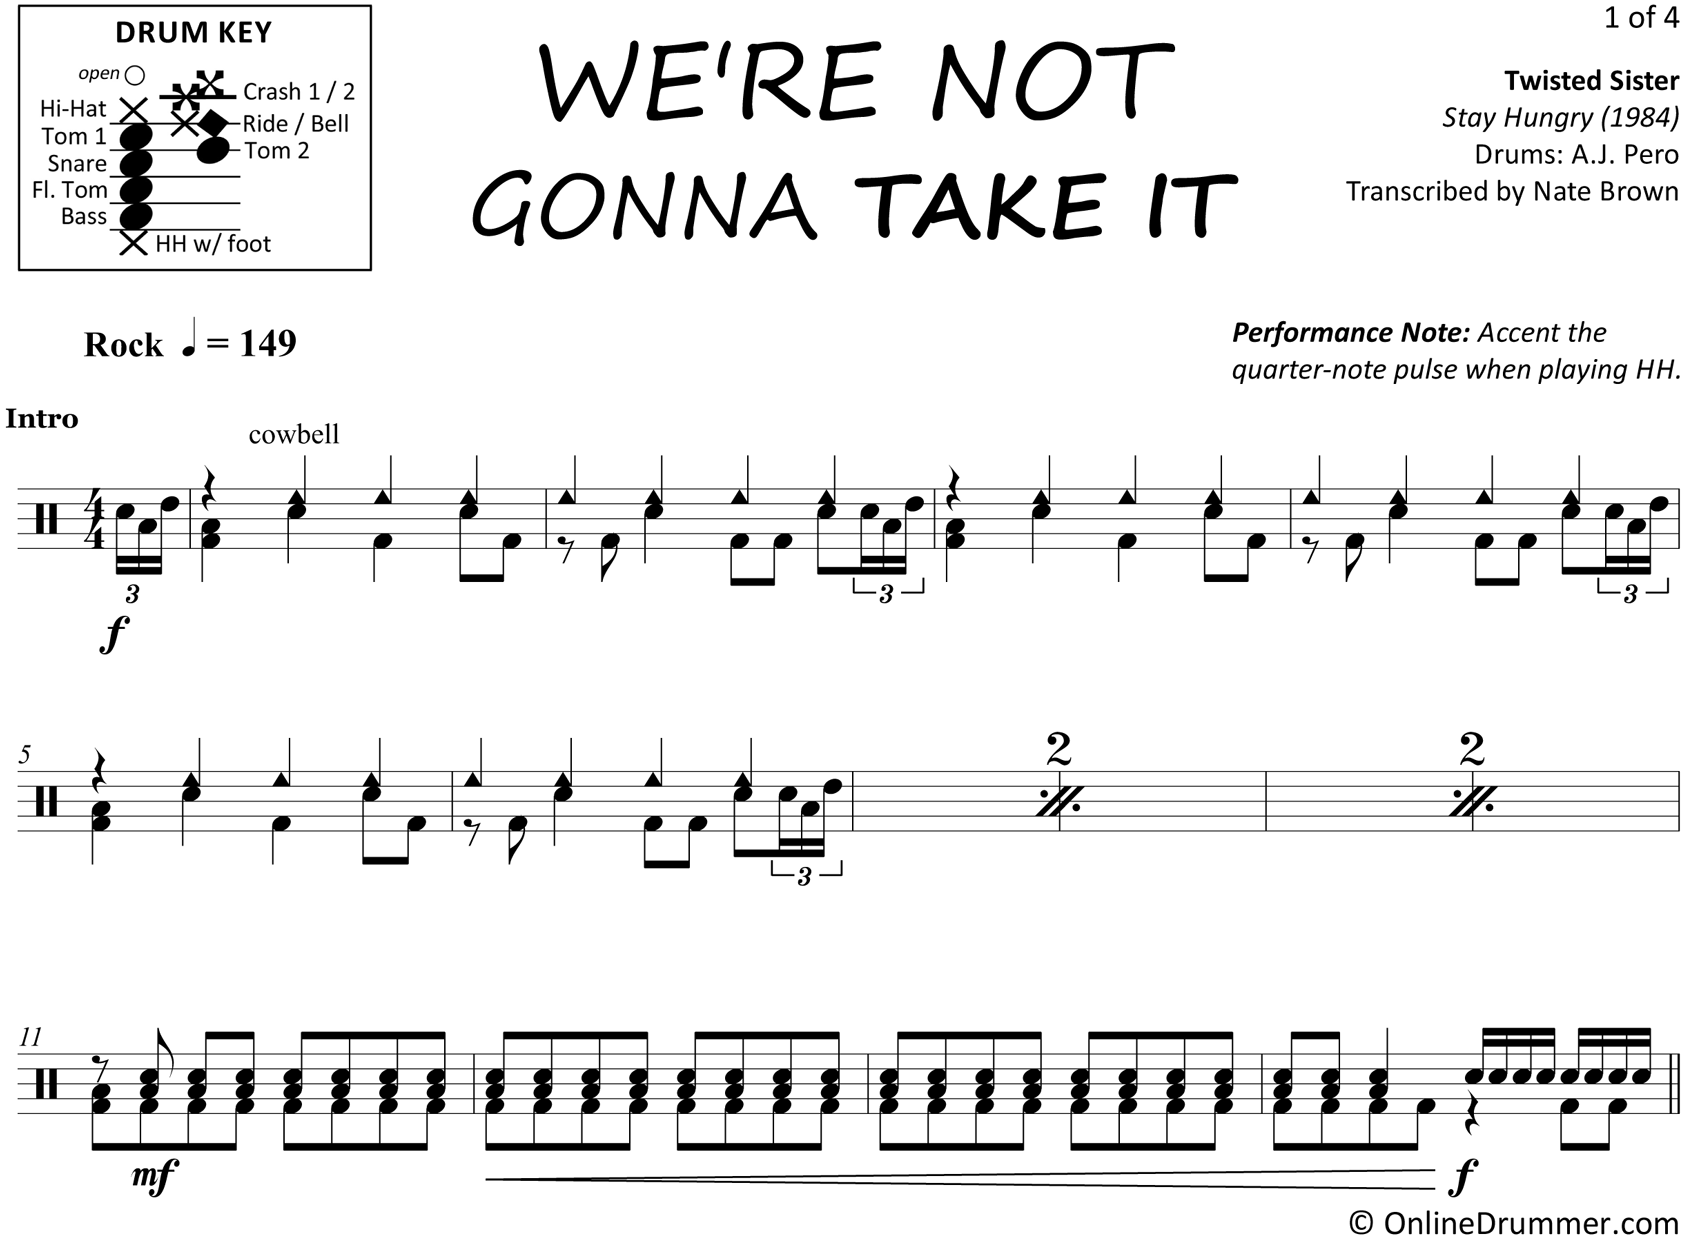 We're Not Gonna Take It - Twisted Sister - Drum Sheet Music